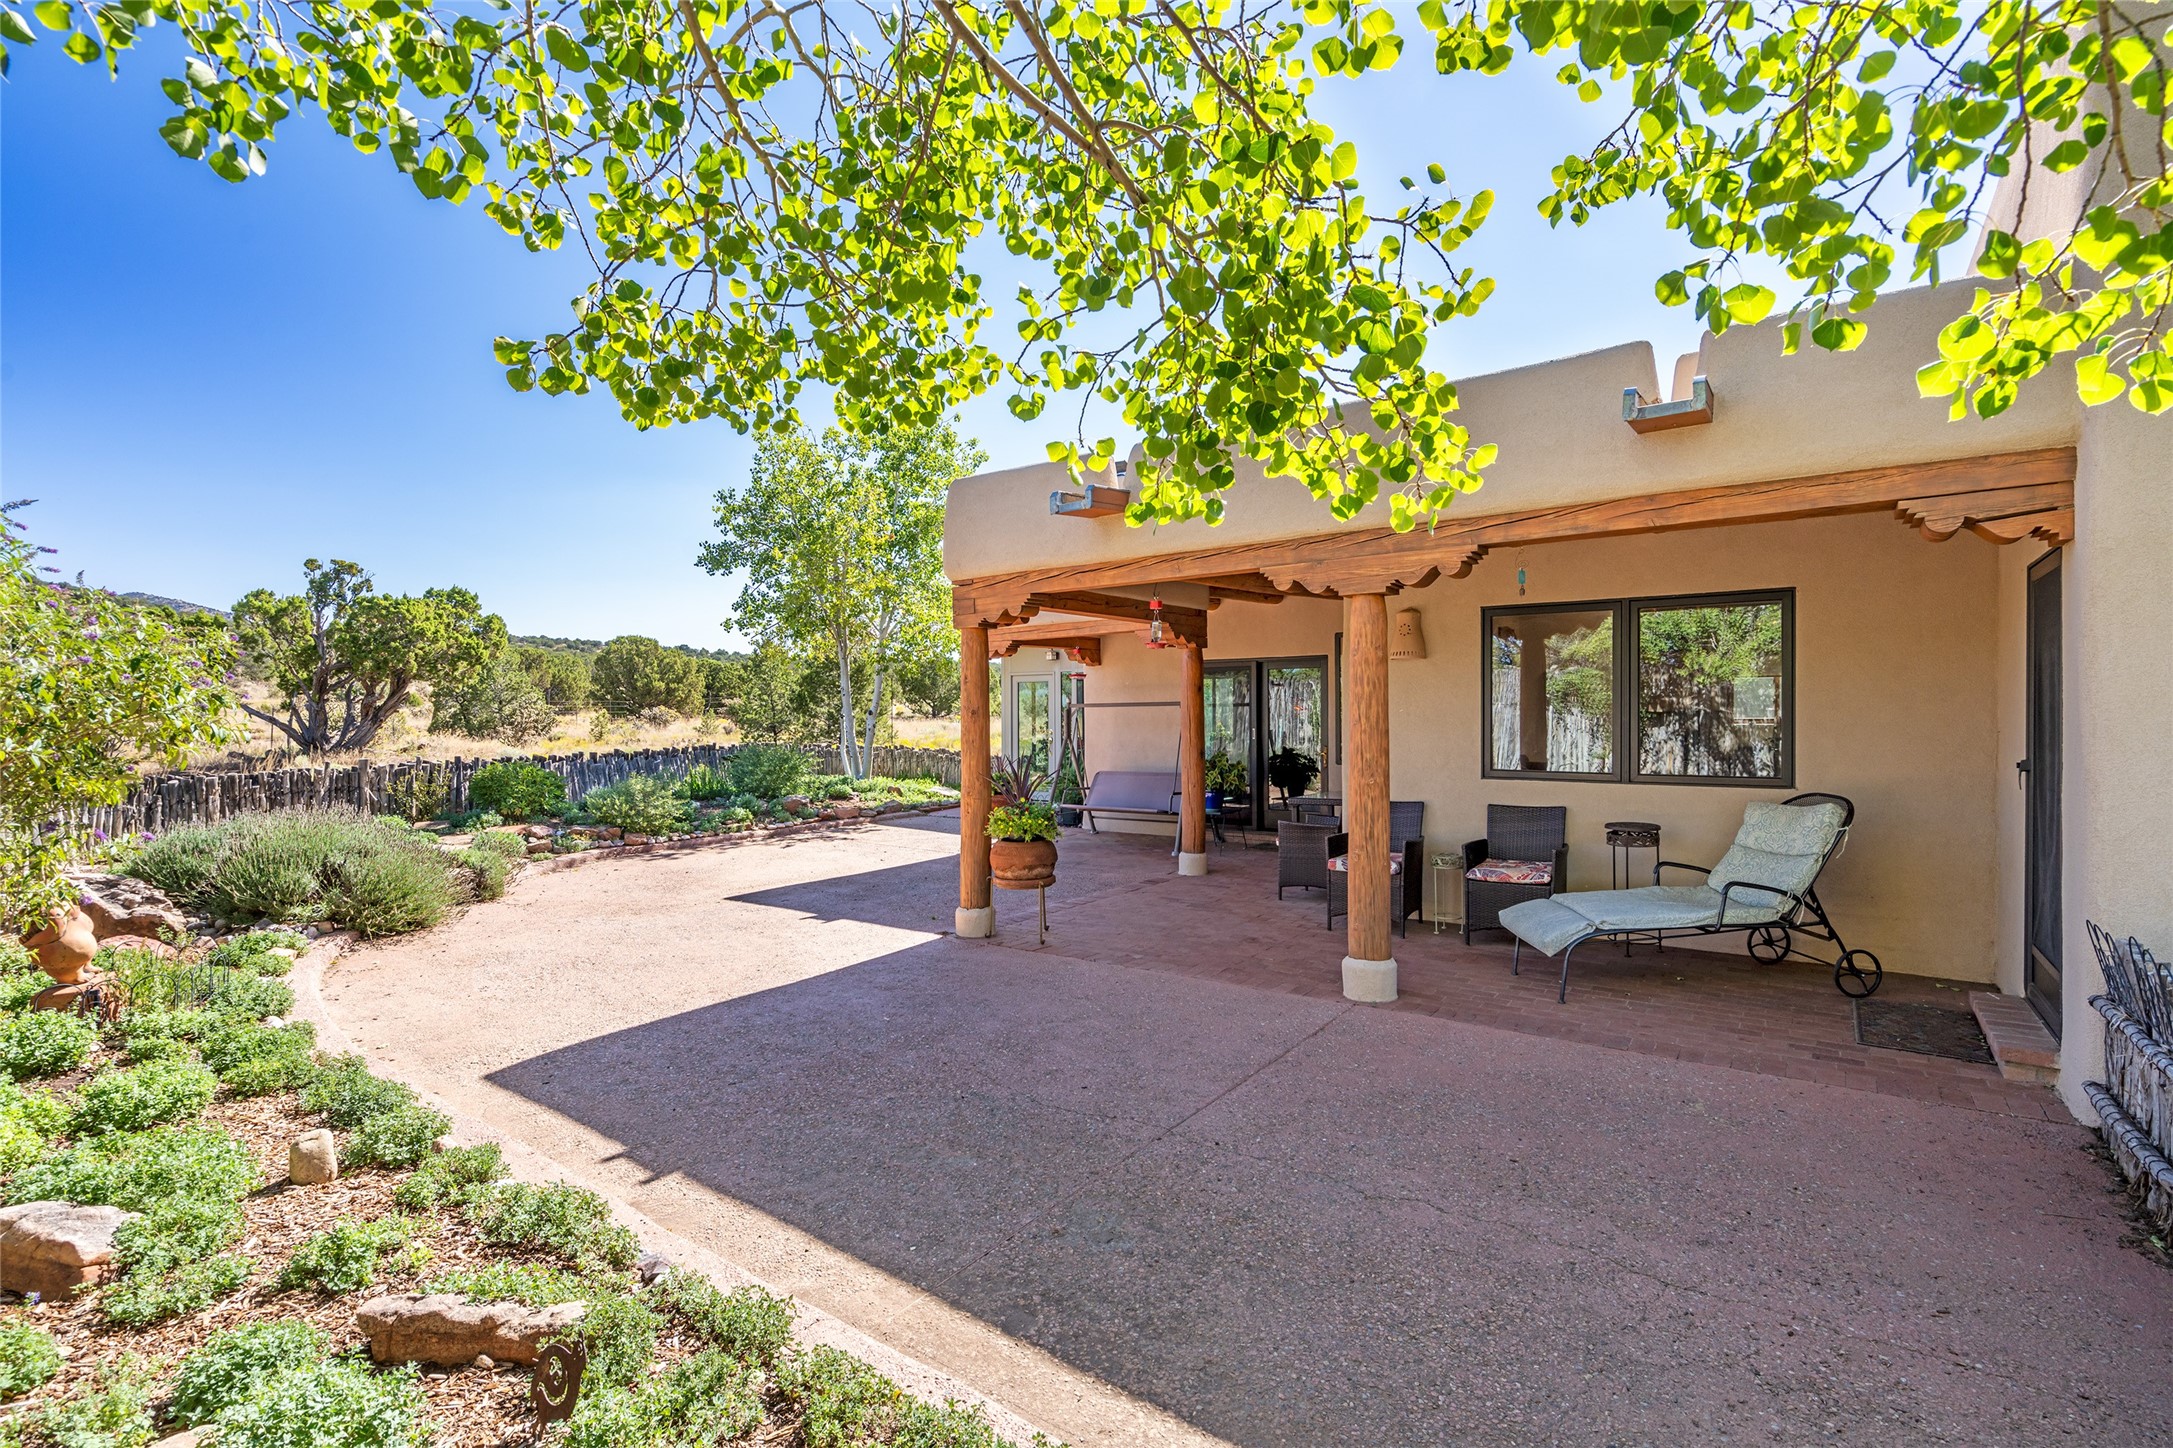 9 Calle Cabito, Santa Fe, New Mexico 87508, 4 Bedrooms Bedrooms, ,3 BathroomsBathrooms,Residential,For Sale,9 Calle Cabito,202400017